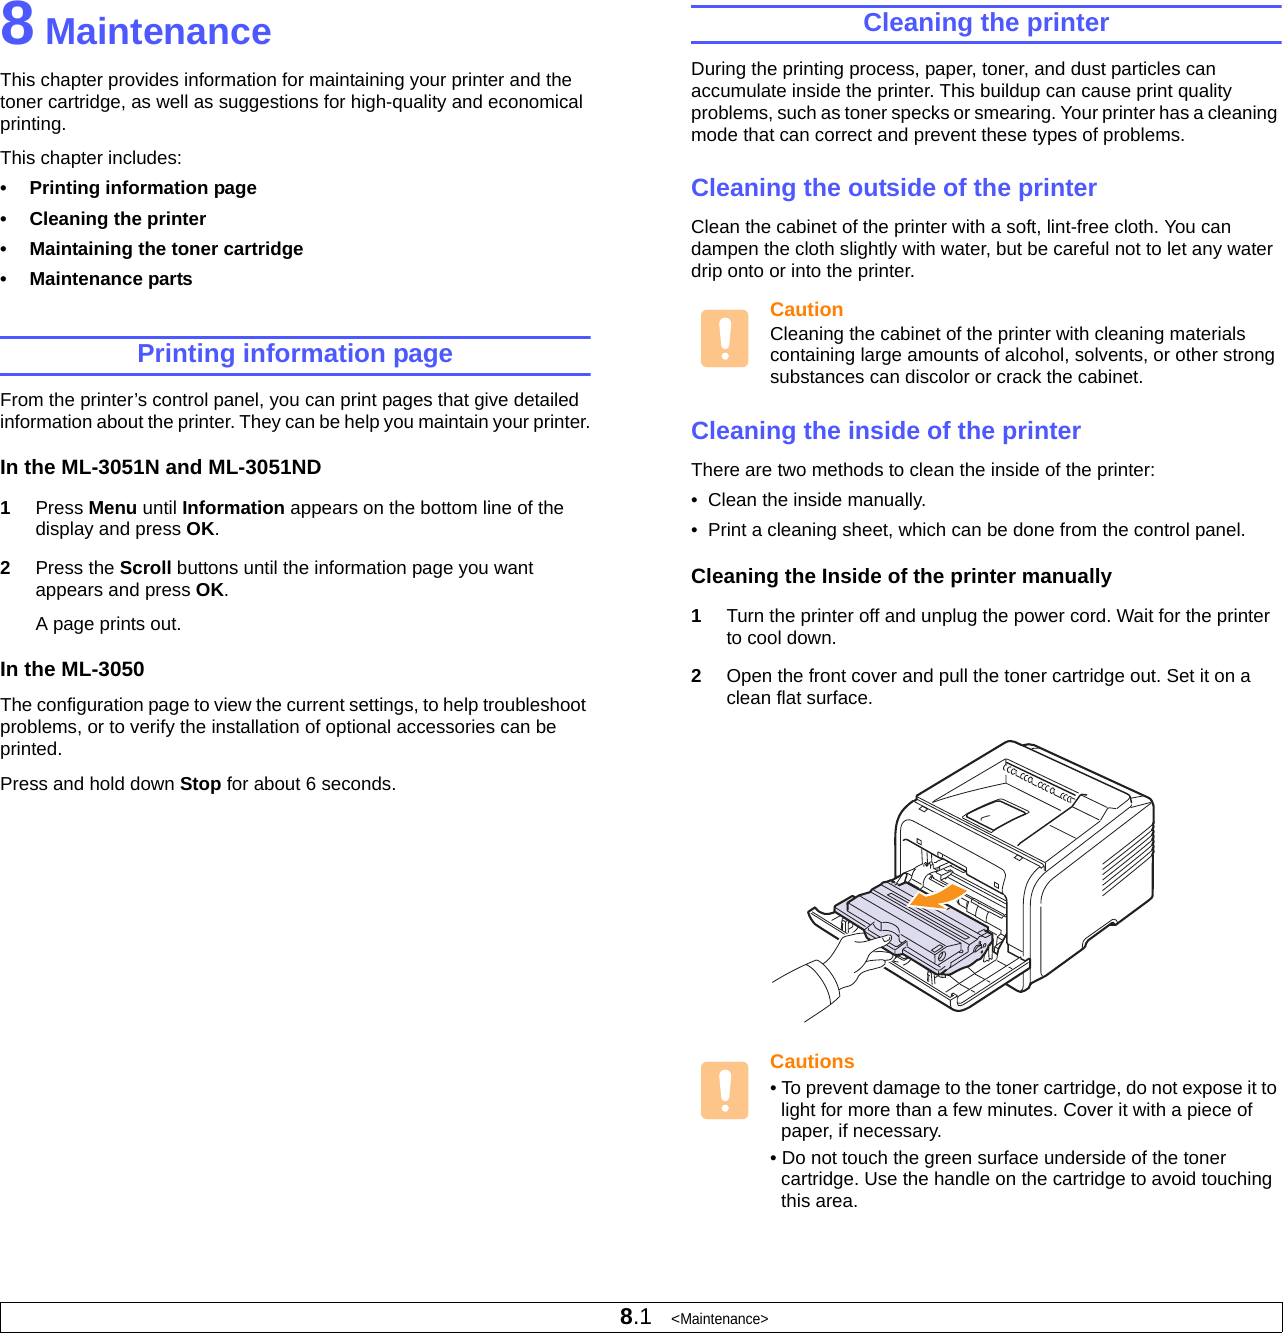 8.1   &lt;Maintenance&gt;8 MaintenanceThis chapter provides information for maintaining your printer and the toner cartridge, as well as suggestions for high-quality and economical printing.This chapter includes:• Printing information page• Cleaning the printer• Maintaining the toner cartridge• Maintenance partsPrinting information pageFrom the printer’s control panel, you can print pages that give detailed information about the printer. They can be help you maintain your printer.In the ML-3051N and ML-3051ND1Press Menu until Information appears on the bottom line of the display and press OK.2Press the Scroll buttons until the information page you want appears and press OK.A page prints out.In the ML-3050The configuration page to view the current settings, to help troubleshoot problems, or to verify the installation of optional accessories can be printed.Press and hold down Stop for about 6 seconds.Cleaning the printerDuring the printing process, paper, toner, and dust particles can accumulate inside the printer. This buildup can cause print quality problems, such as toner specks or smearing. Your printer has a cleaning mode that can correct and prevent these types of problems.Cleaning the outside of the printerClean the cabinet of the printer with a soft, lint-free cloth. You can dampen the cloth slightly with water, but be careful not to let any water drip onto or into the printer.CautionCleaning the cabinet of the printer with cleaning materials containing large amounts of alcohol, solvents, or other strong substances can discolor or crack the cabinet.Cleaning the inside of the printerThere are two methods to clean the inside of the printer:•  Clean the inside manually.•  Print a cleaning sheet, which can be done from the control panel.Cleaning the Inside of the printer manually1Turn the printer off and unplug the power cord. Wait for the printer to cool down.2Open the front cover and pull the toner cartridge out. Set it on a clean flat surface.Cautions• To prevent damage to the toner cartridge, do not expose it to light for more than a few minutes. Cover it with a piece of paper, if necessary. • Do not touch the green surface underside of the toner cartridge. Use the handle on the cartridge to avoid touching this area.